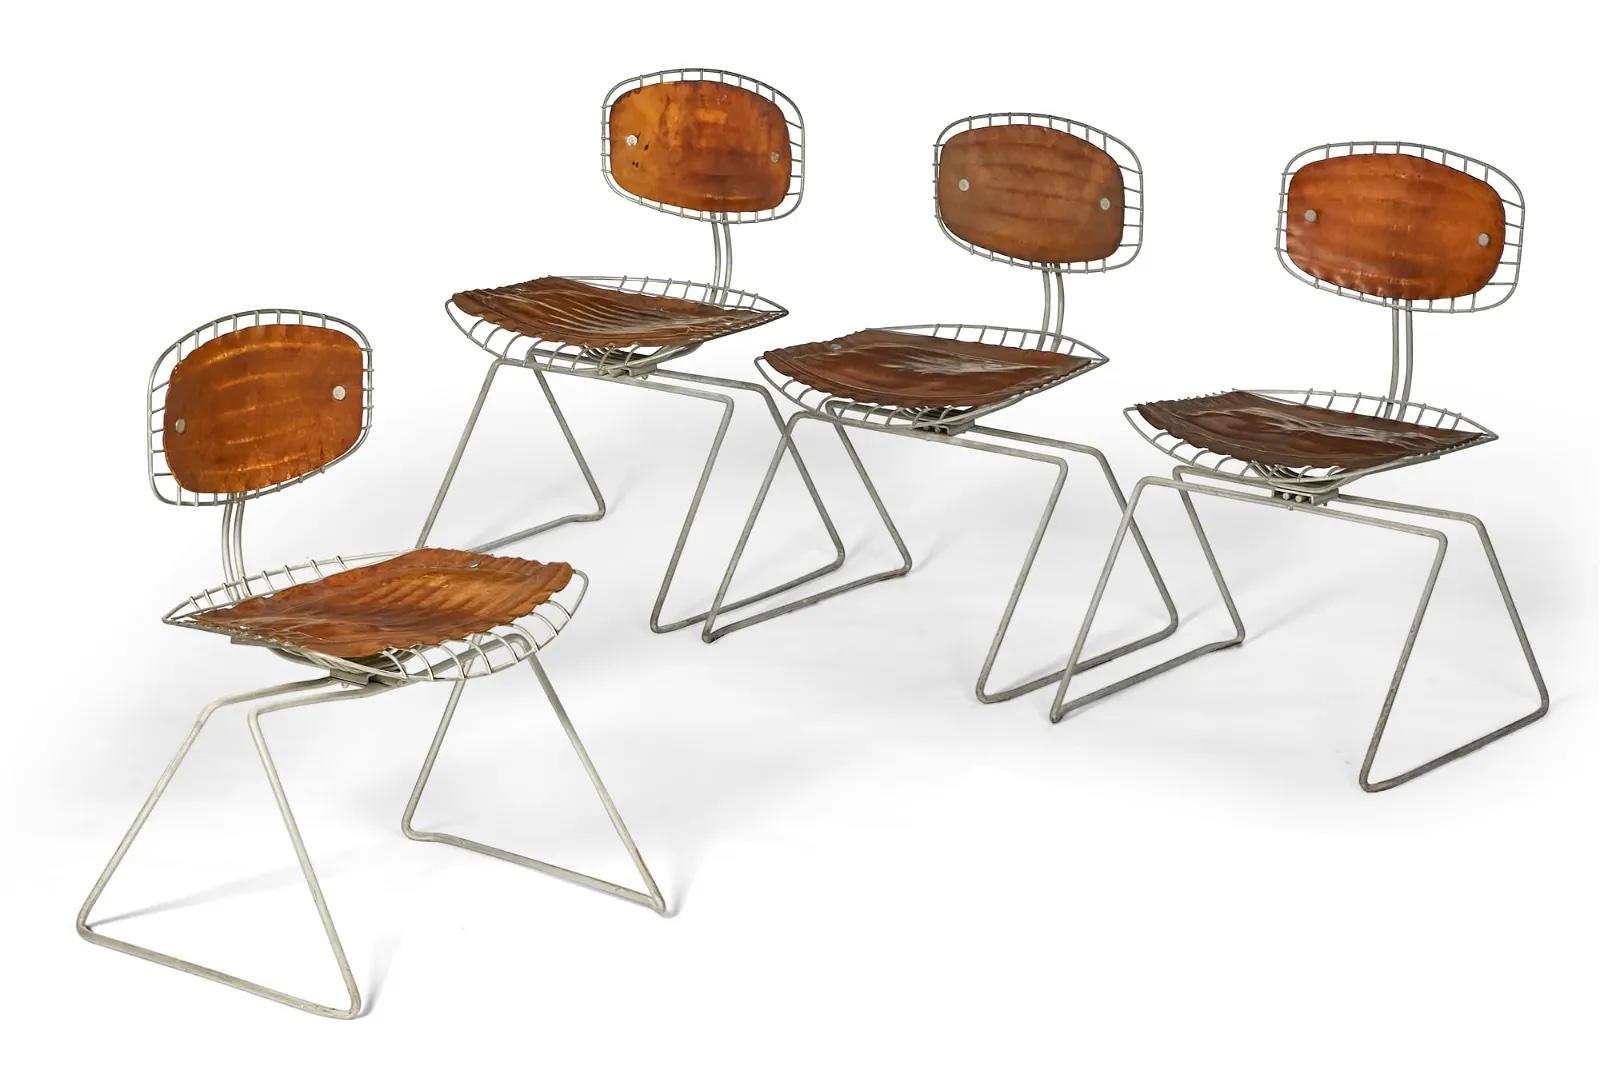 A matched set of four Michel Cadestin and Georges Laurent leather and metal Beaubourg chairs, from the Centre Georges Pompidou, Paris. These chairs were designed in 1976 for the competition to determine which chairs would be used in the Pompidou